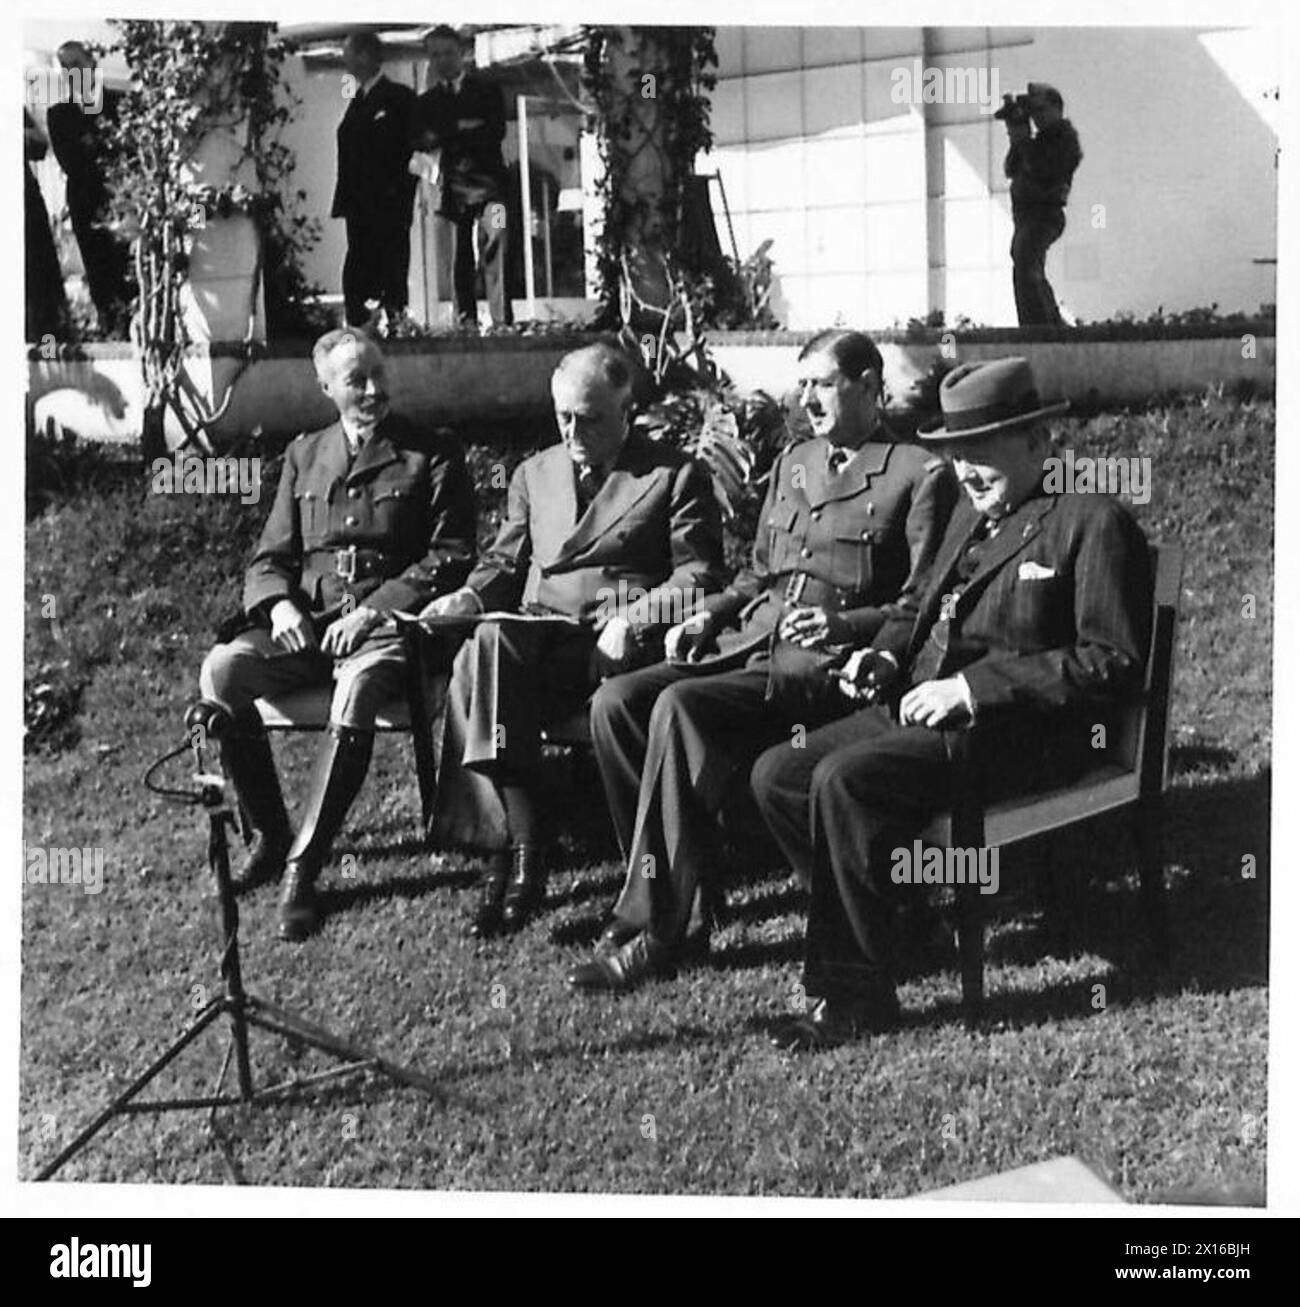 THE CASABLANCA CONFERENCE, JANUARY 1943 - General Henri Giraud, the High Commissioner of French North and West Africa, President Franklin D. Roosevelt, General Charles de Gaulle, the leader of the Free French, and Prime Minister Winston Churchill during a press conference at Villa Dar es Saada, Casablanca, 24 January 1943 French Army, de Gaulle, Charles André Joseph Marie, Giraud, Henri Honore, Roosevelt, Franklin Delano, Churchill, Winston Leonard Spencer Stock Photo